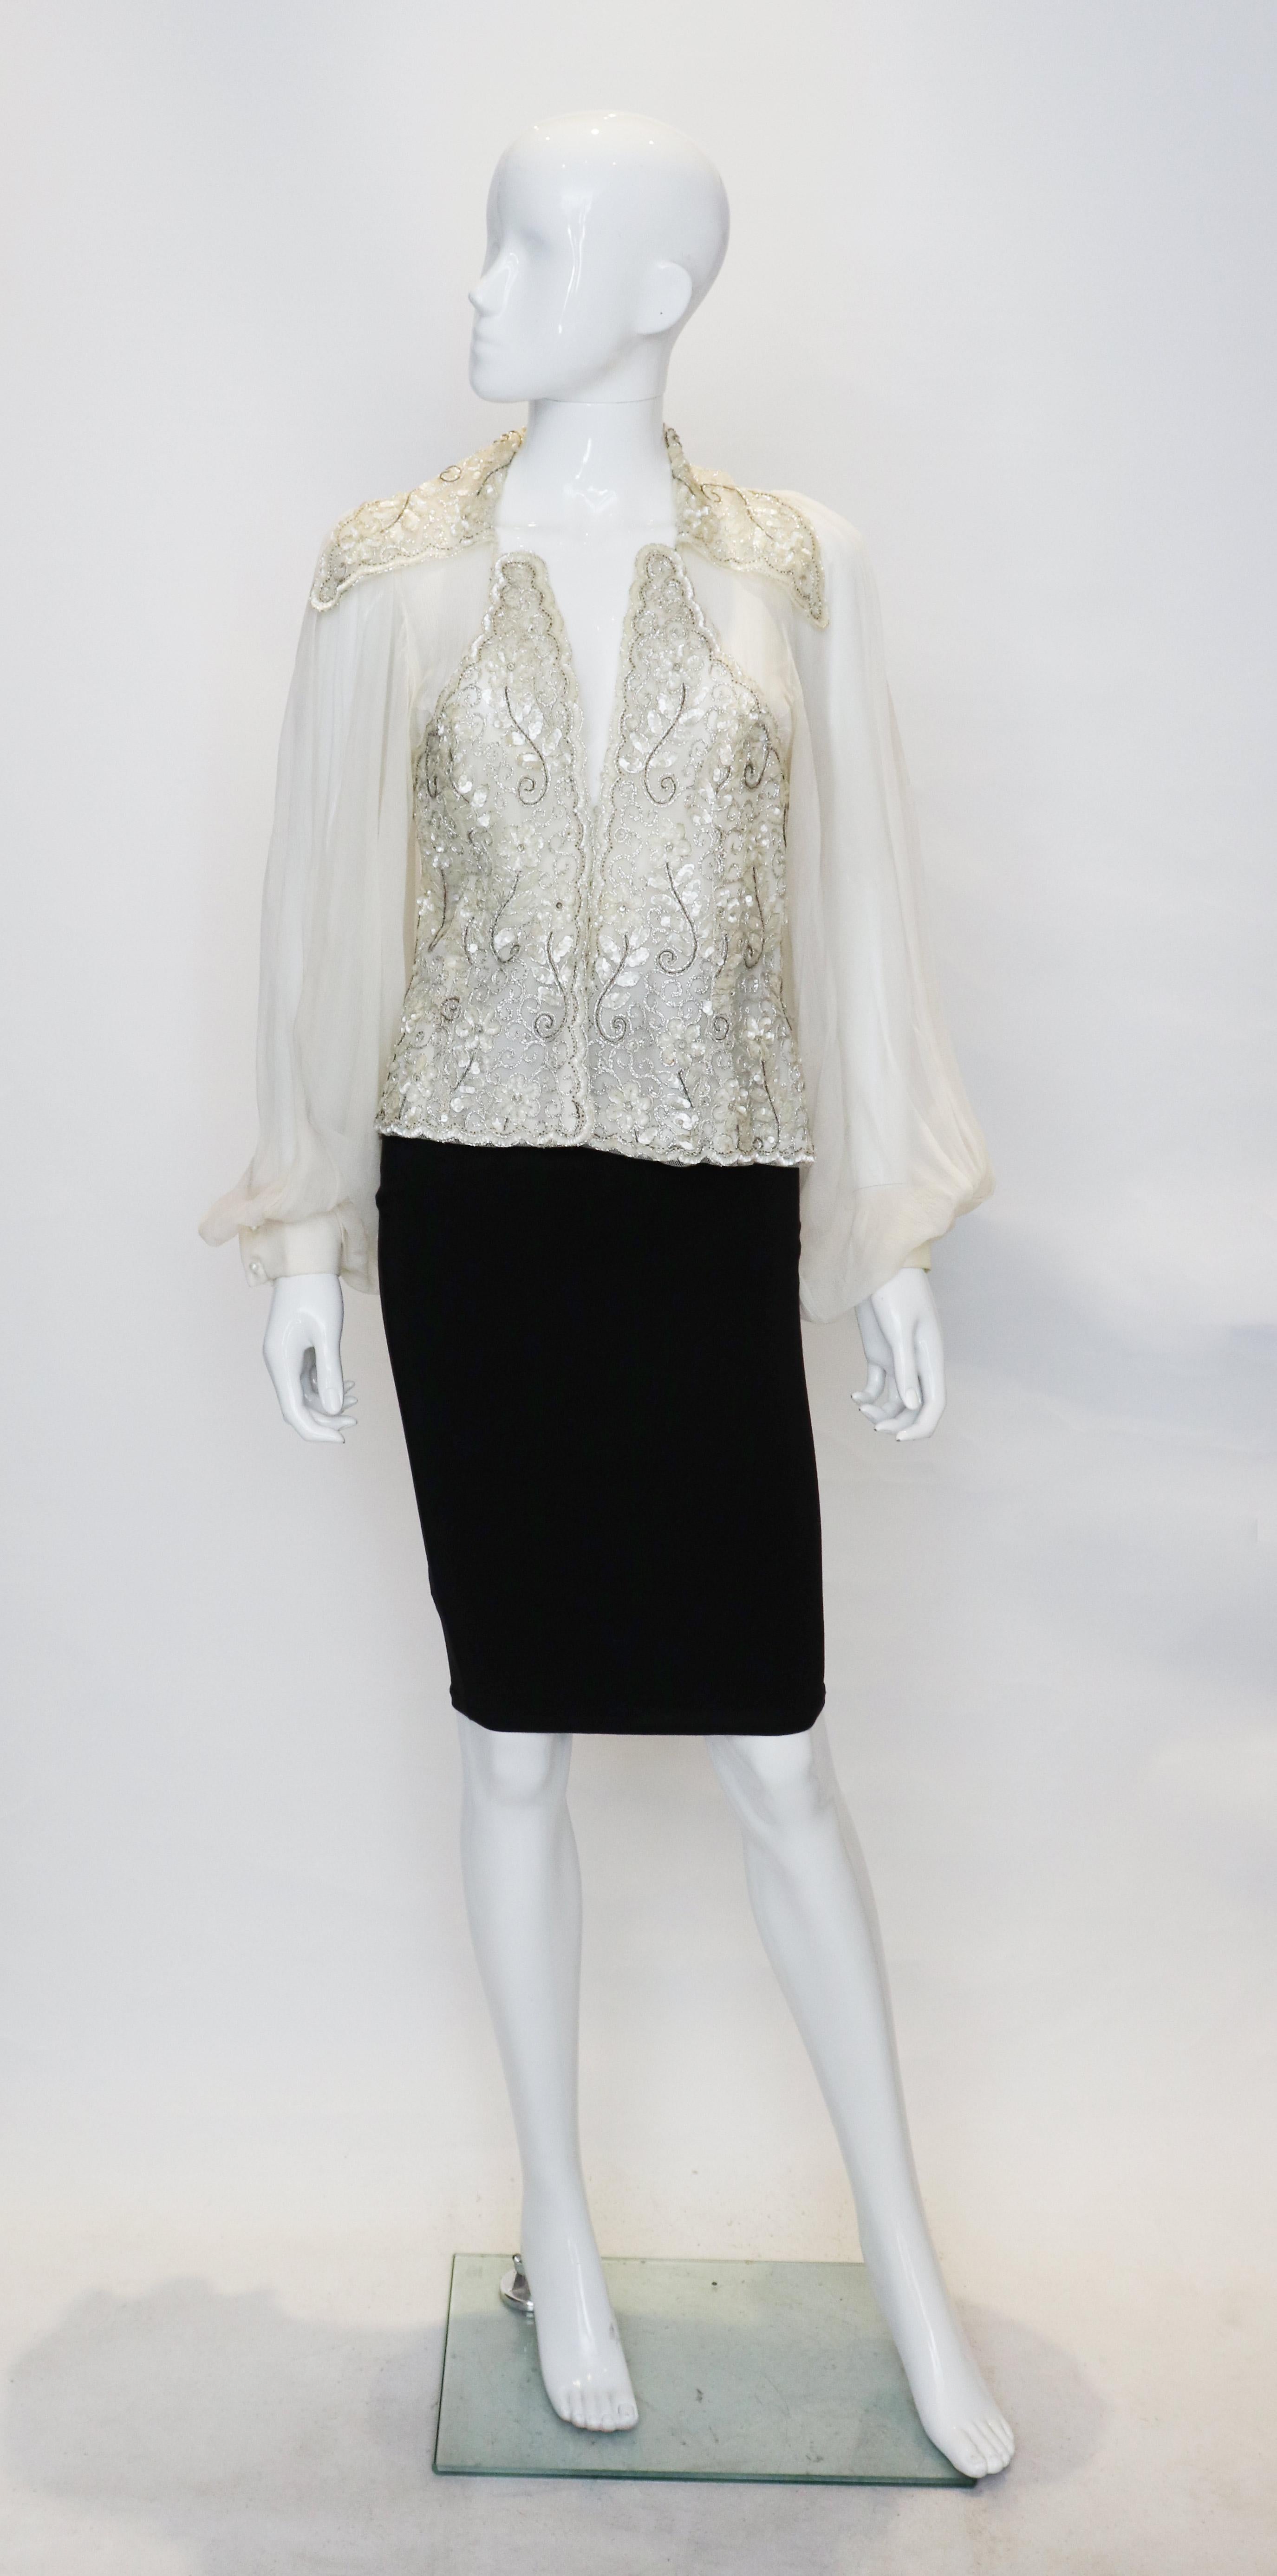 A superb vintage evening top in silk chiffon with wonderful sequin and bead detail on the front and back. The top has a v necklline, two button cuffs , hook and eye opening at the front, and pleats at the back yoke.